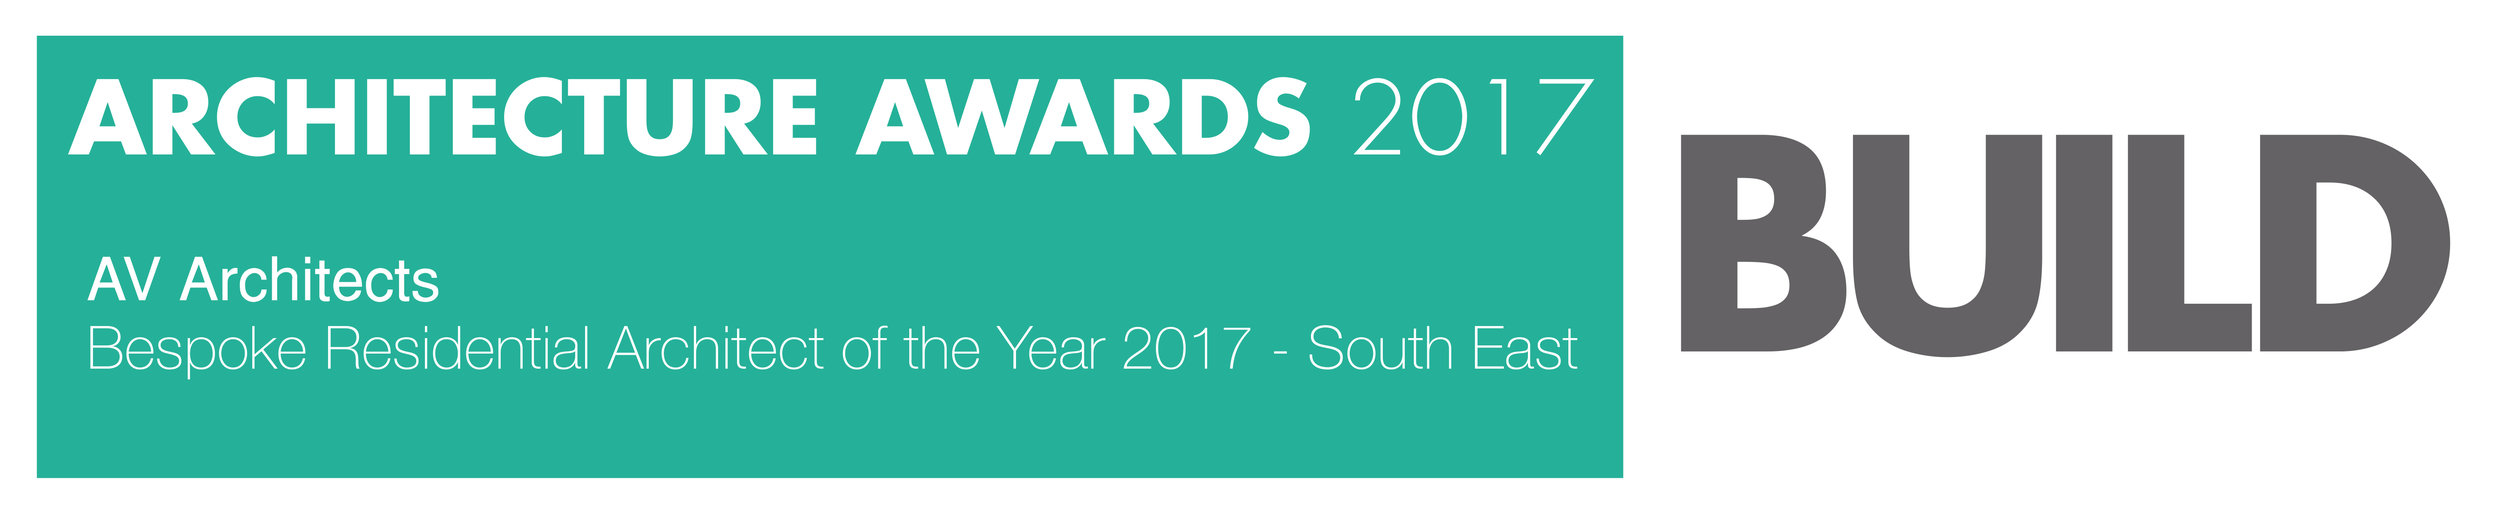 AR170032-Bespoke Residential Architect of the Year 2017 - South East Eng....jpg